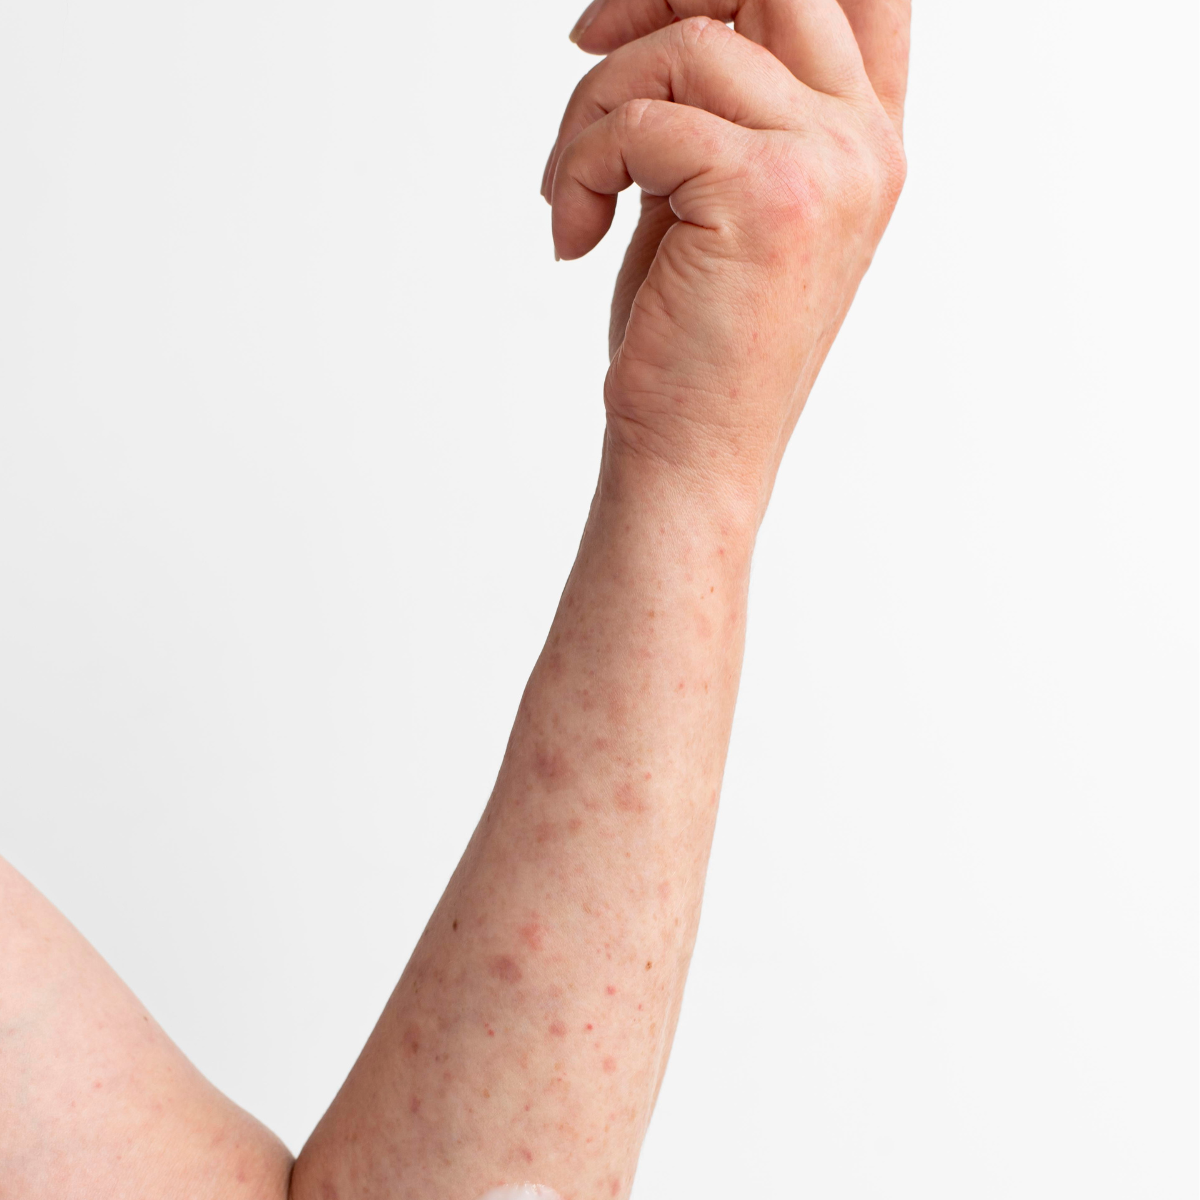 How to Remove Deep Chicken Pox Scars?